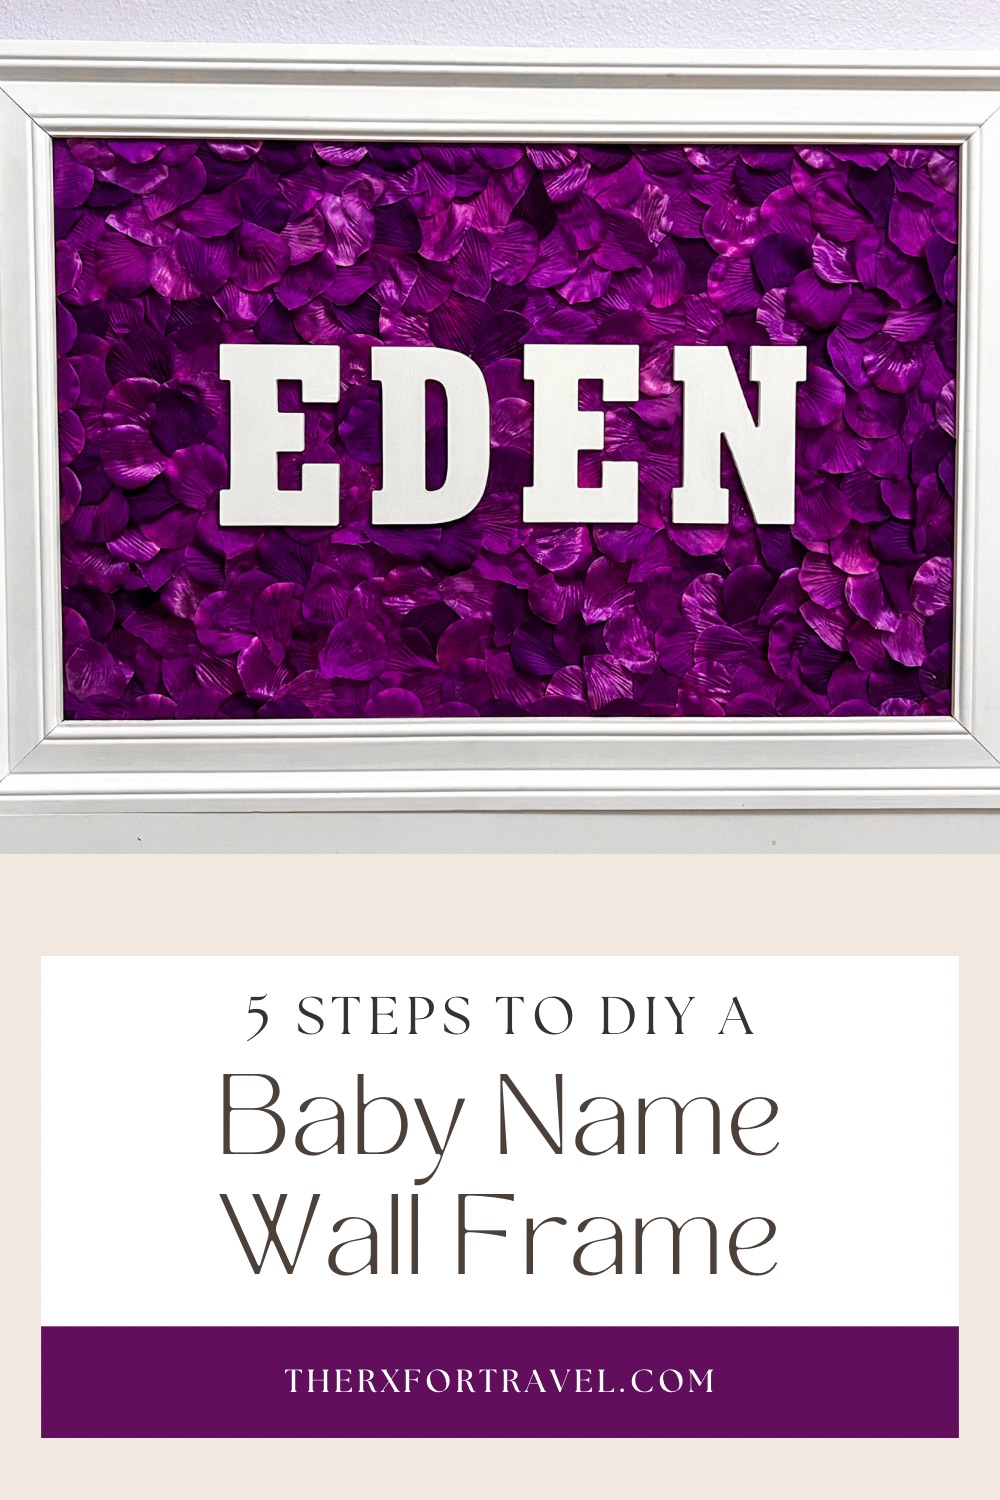 We used the beautiful faux flower petals lining our wedding aisle to make a baby name wall decor for our little girl's nursery. Learn step by step how you can too.